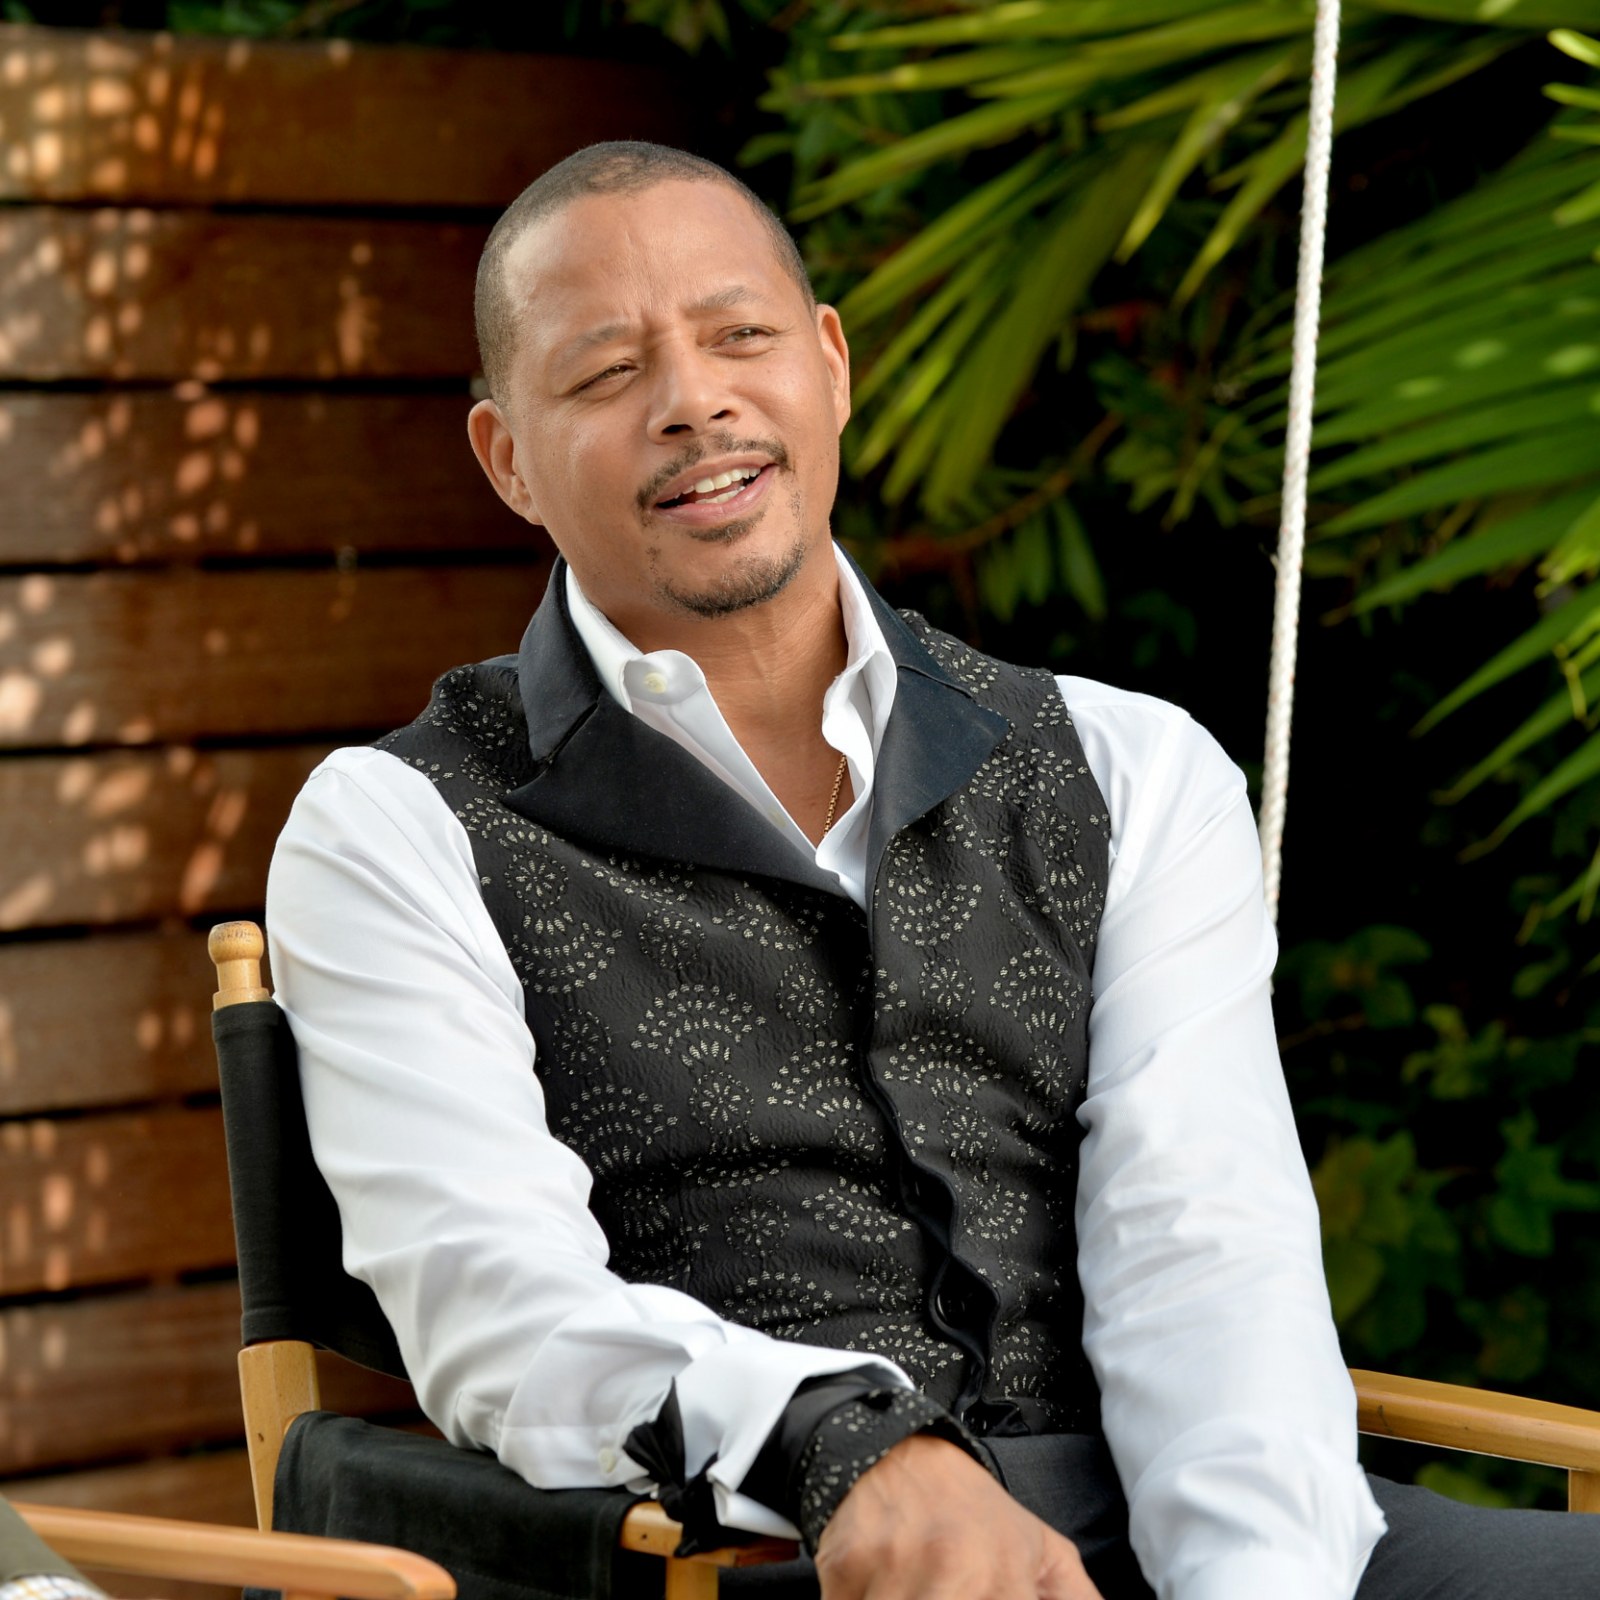 Actor Terrence Howard Says He Invented New Technology for Uganda